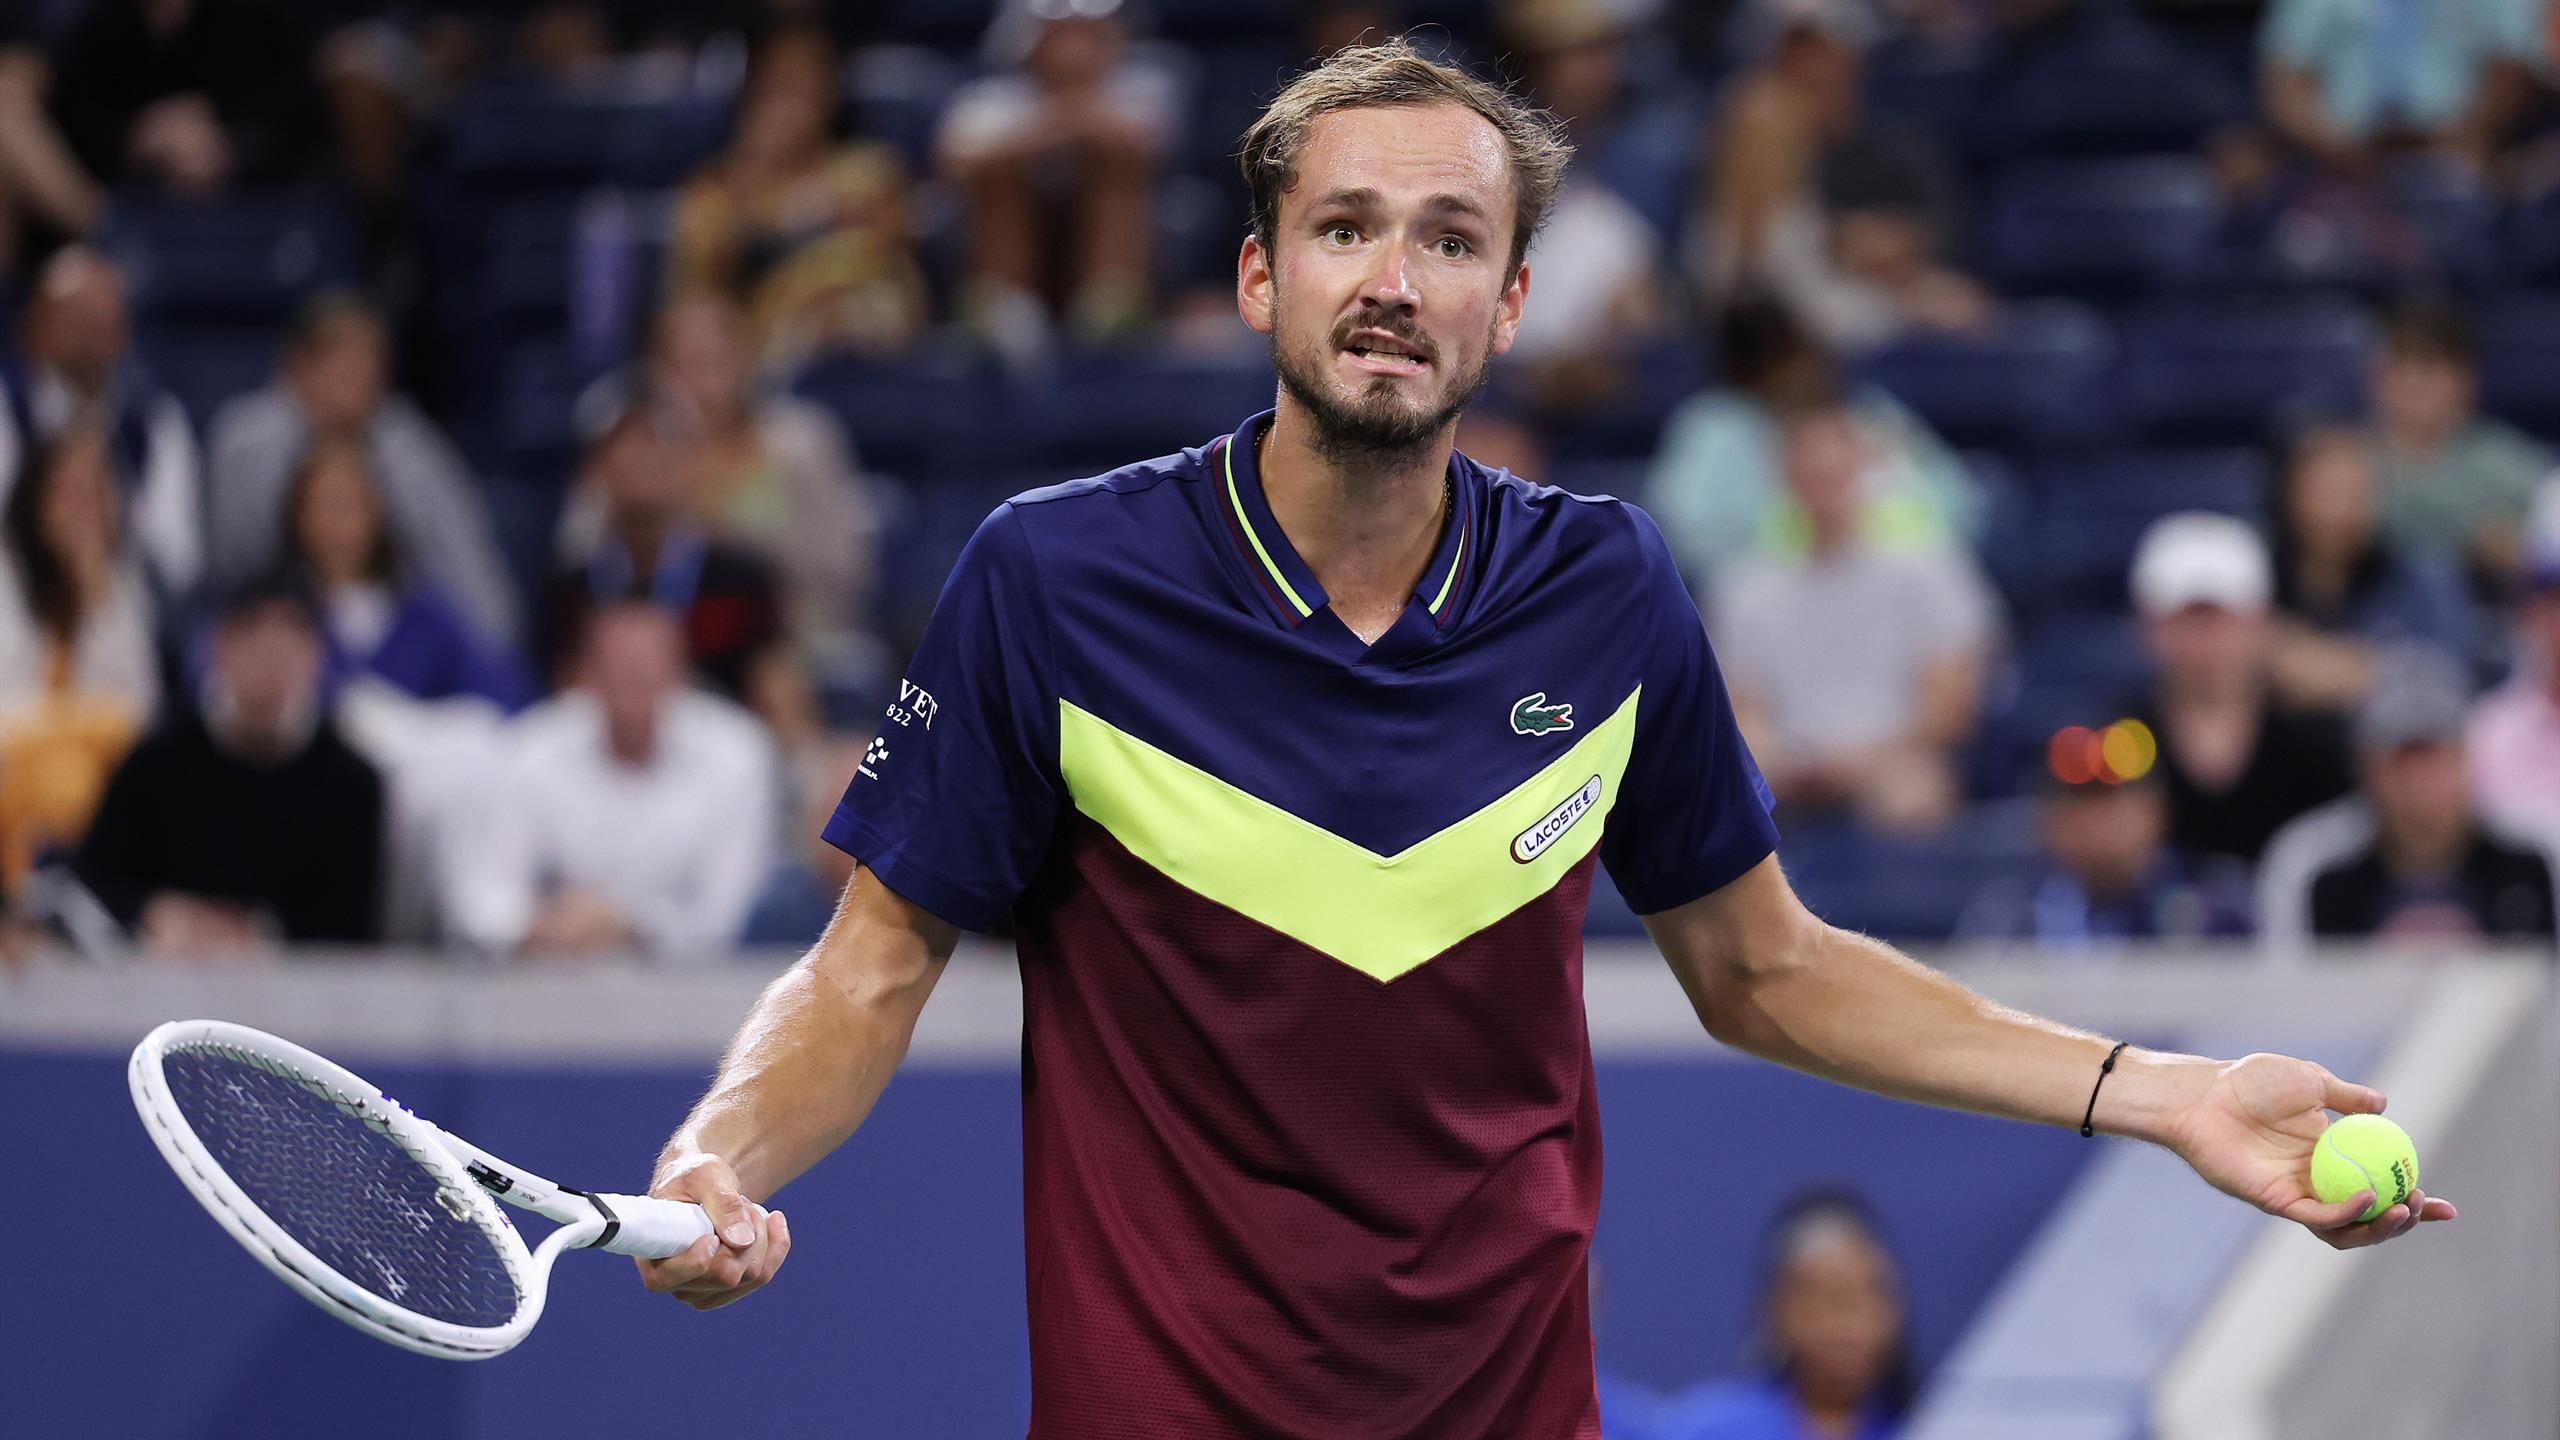 Daniil Medvedev clashes with crowd in win over Christopher O’Connell at US Open - 'Are you stupid or what?' - Eurosport